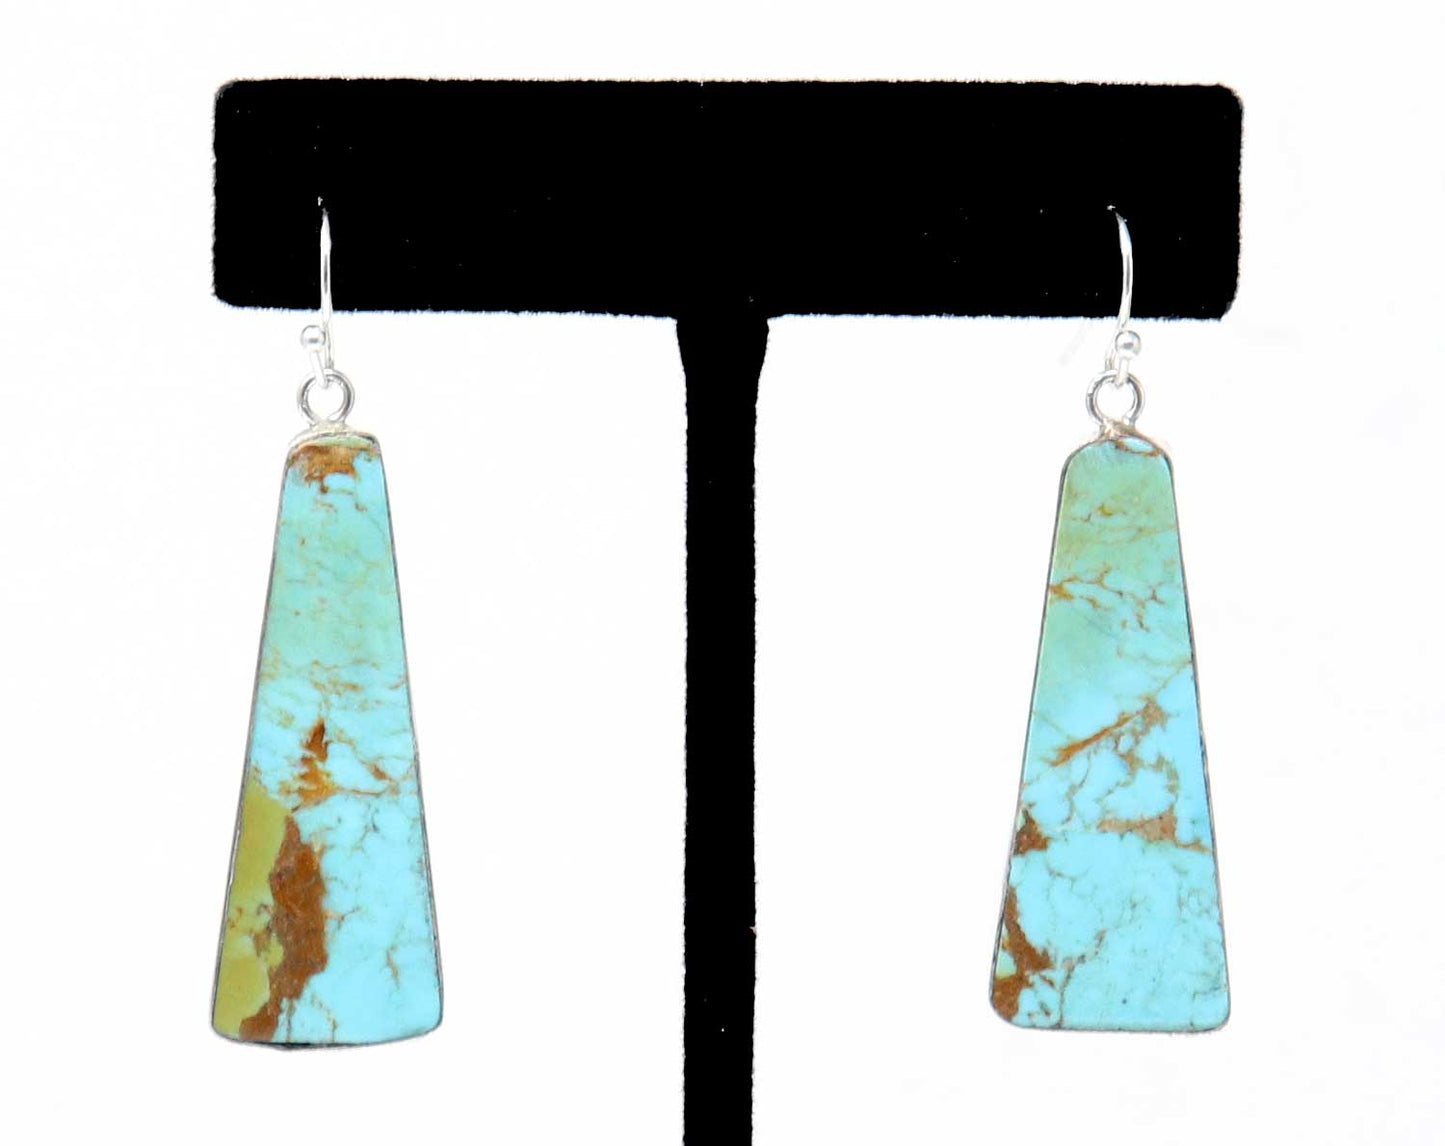 Turquoise & Silver Earrings By Tortalita